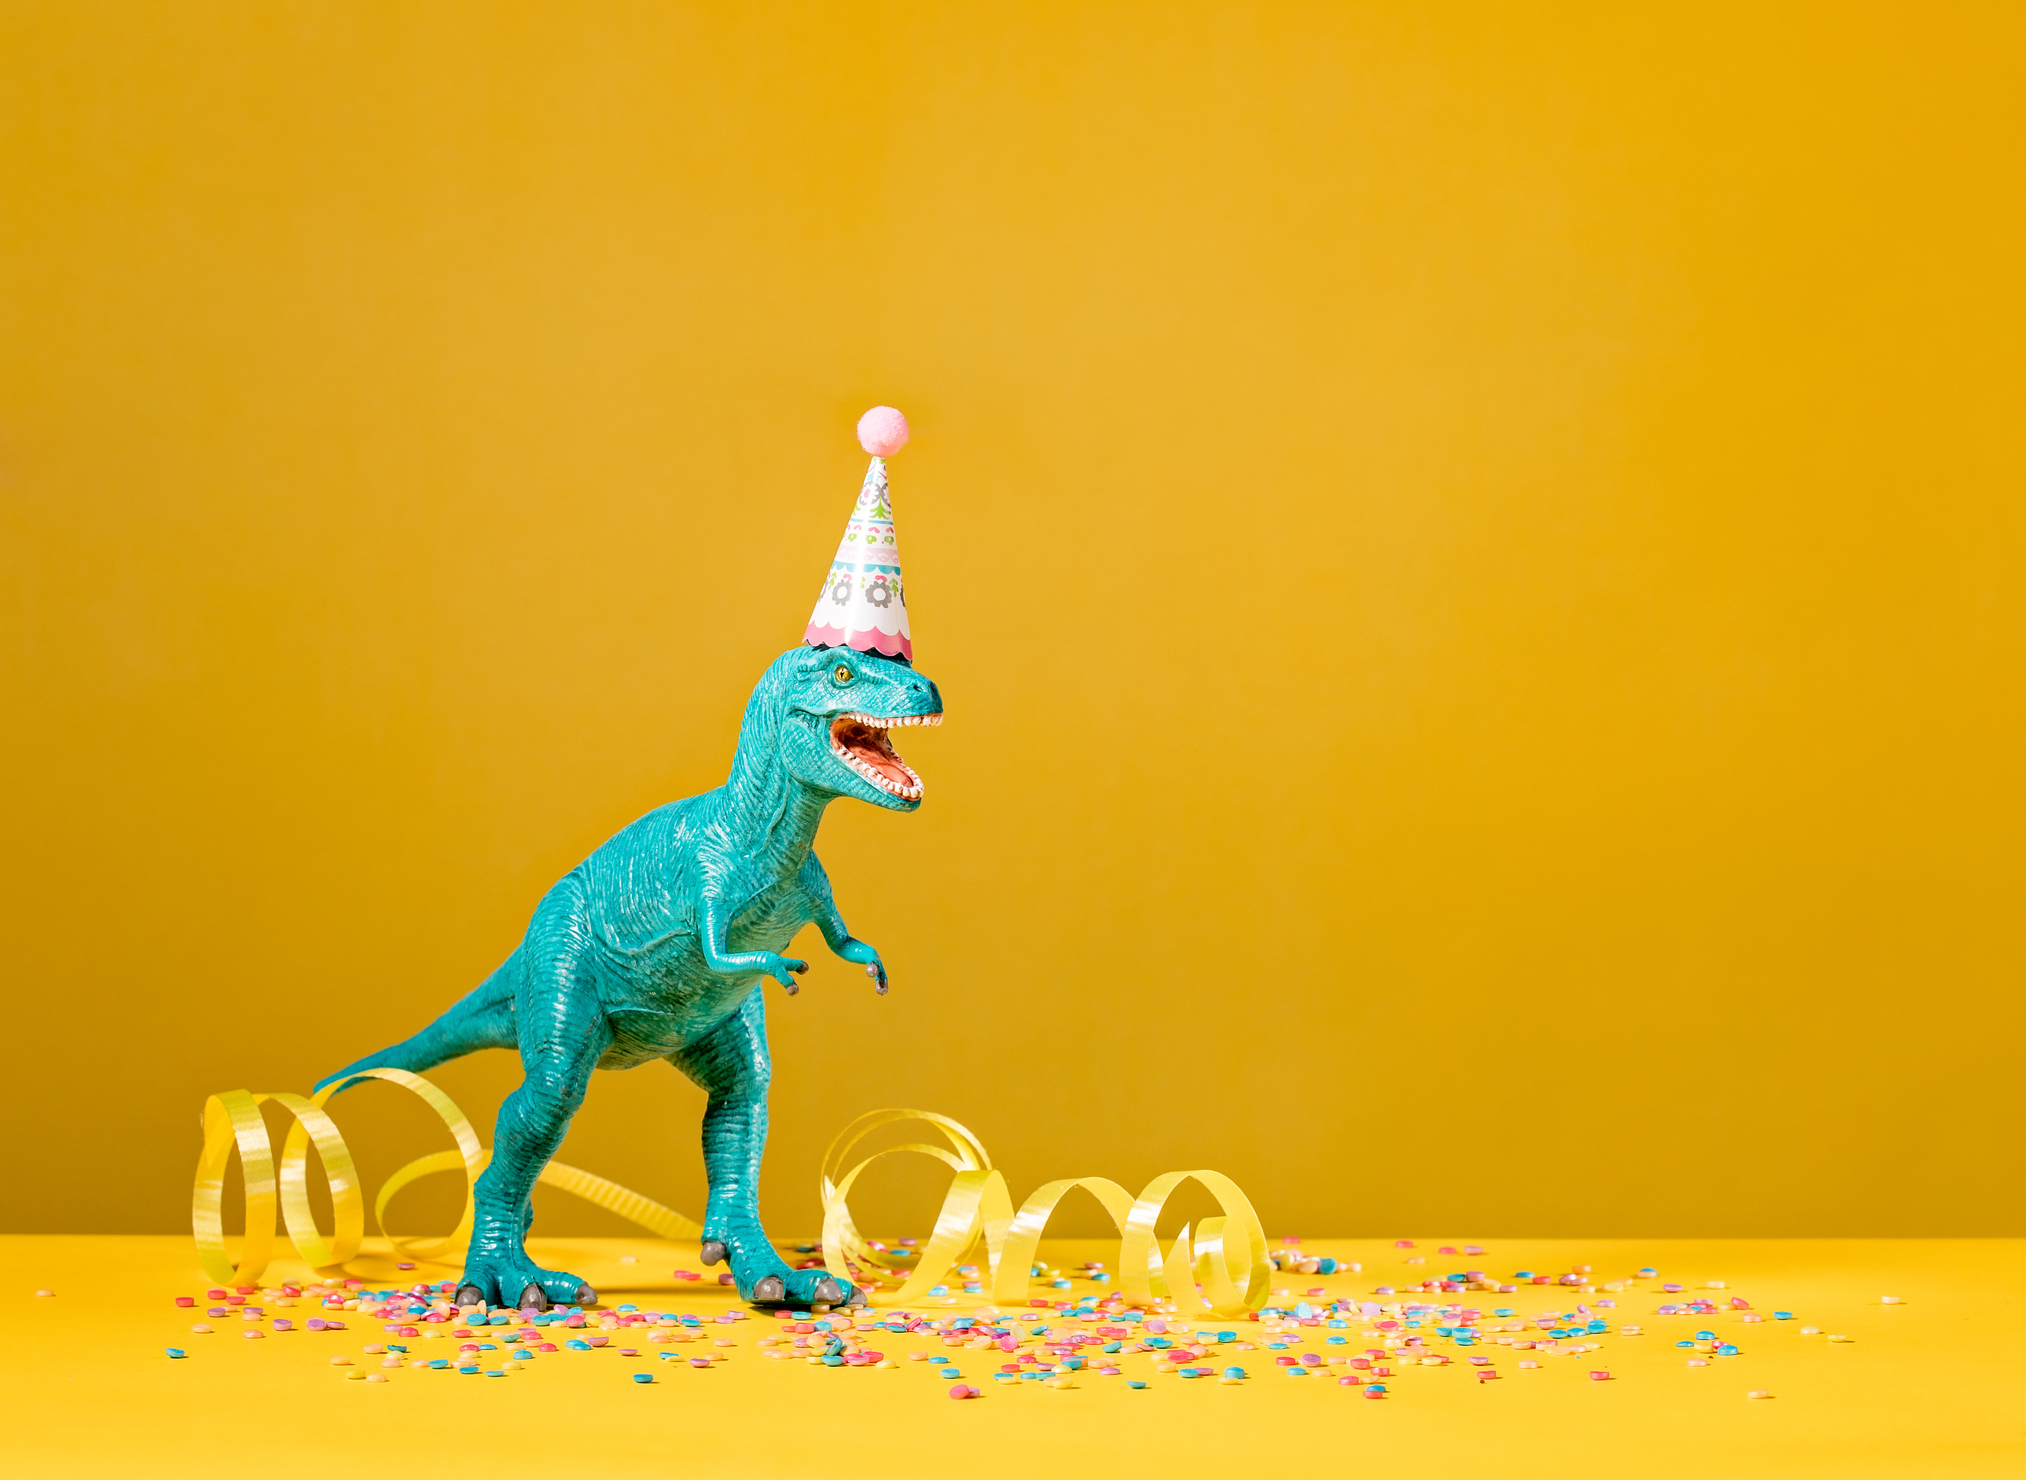 Toy dinosaur with birthday party hat on a yellow background.